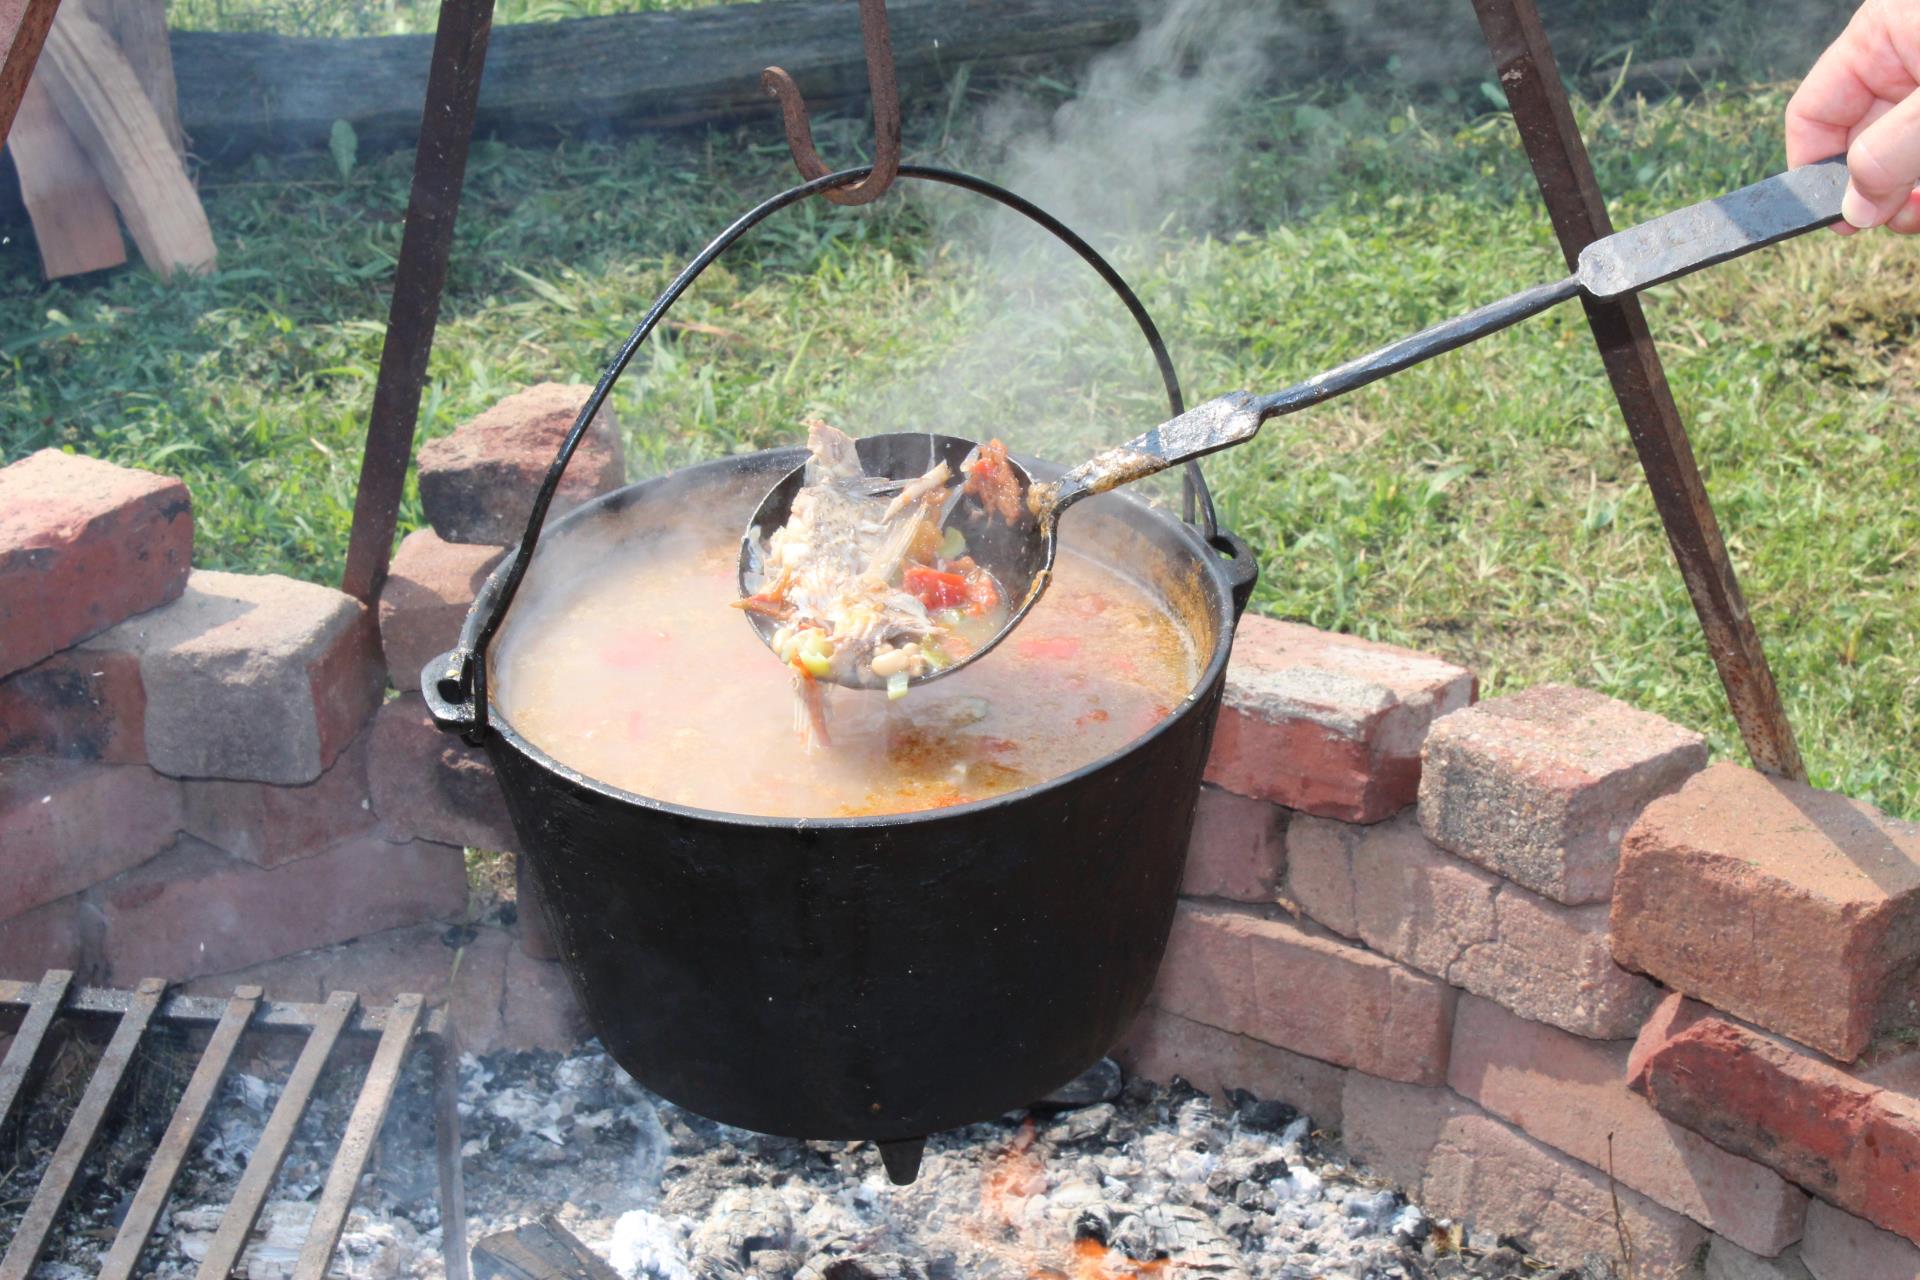 African dish cooking over open fire at Revolution-era farm